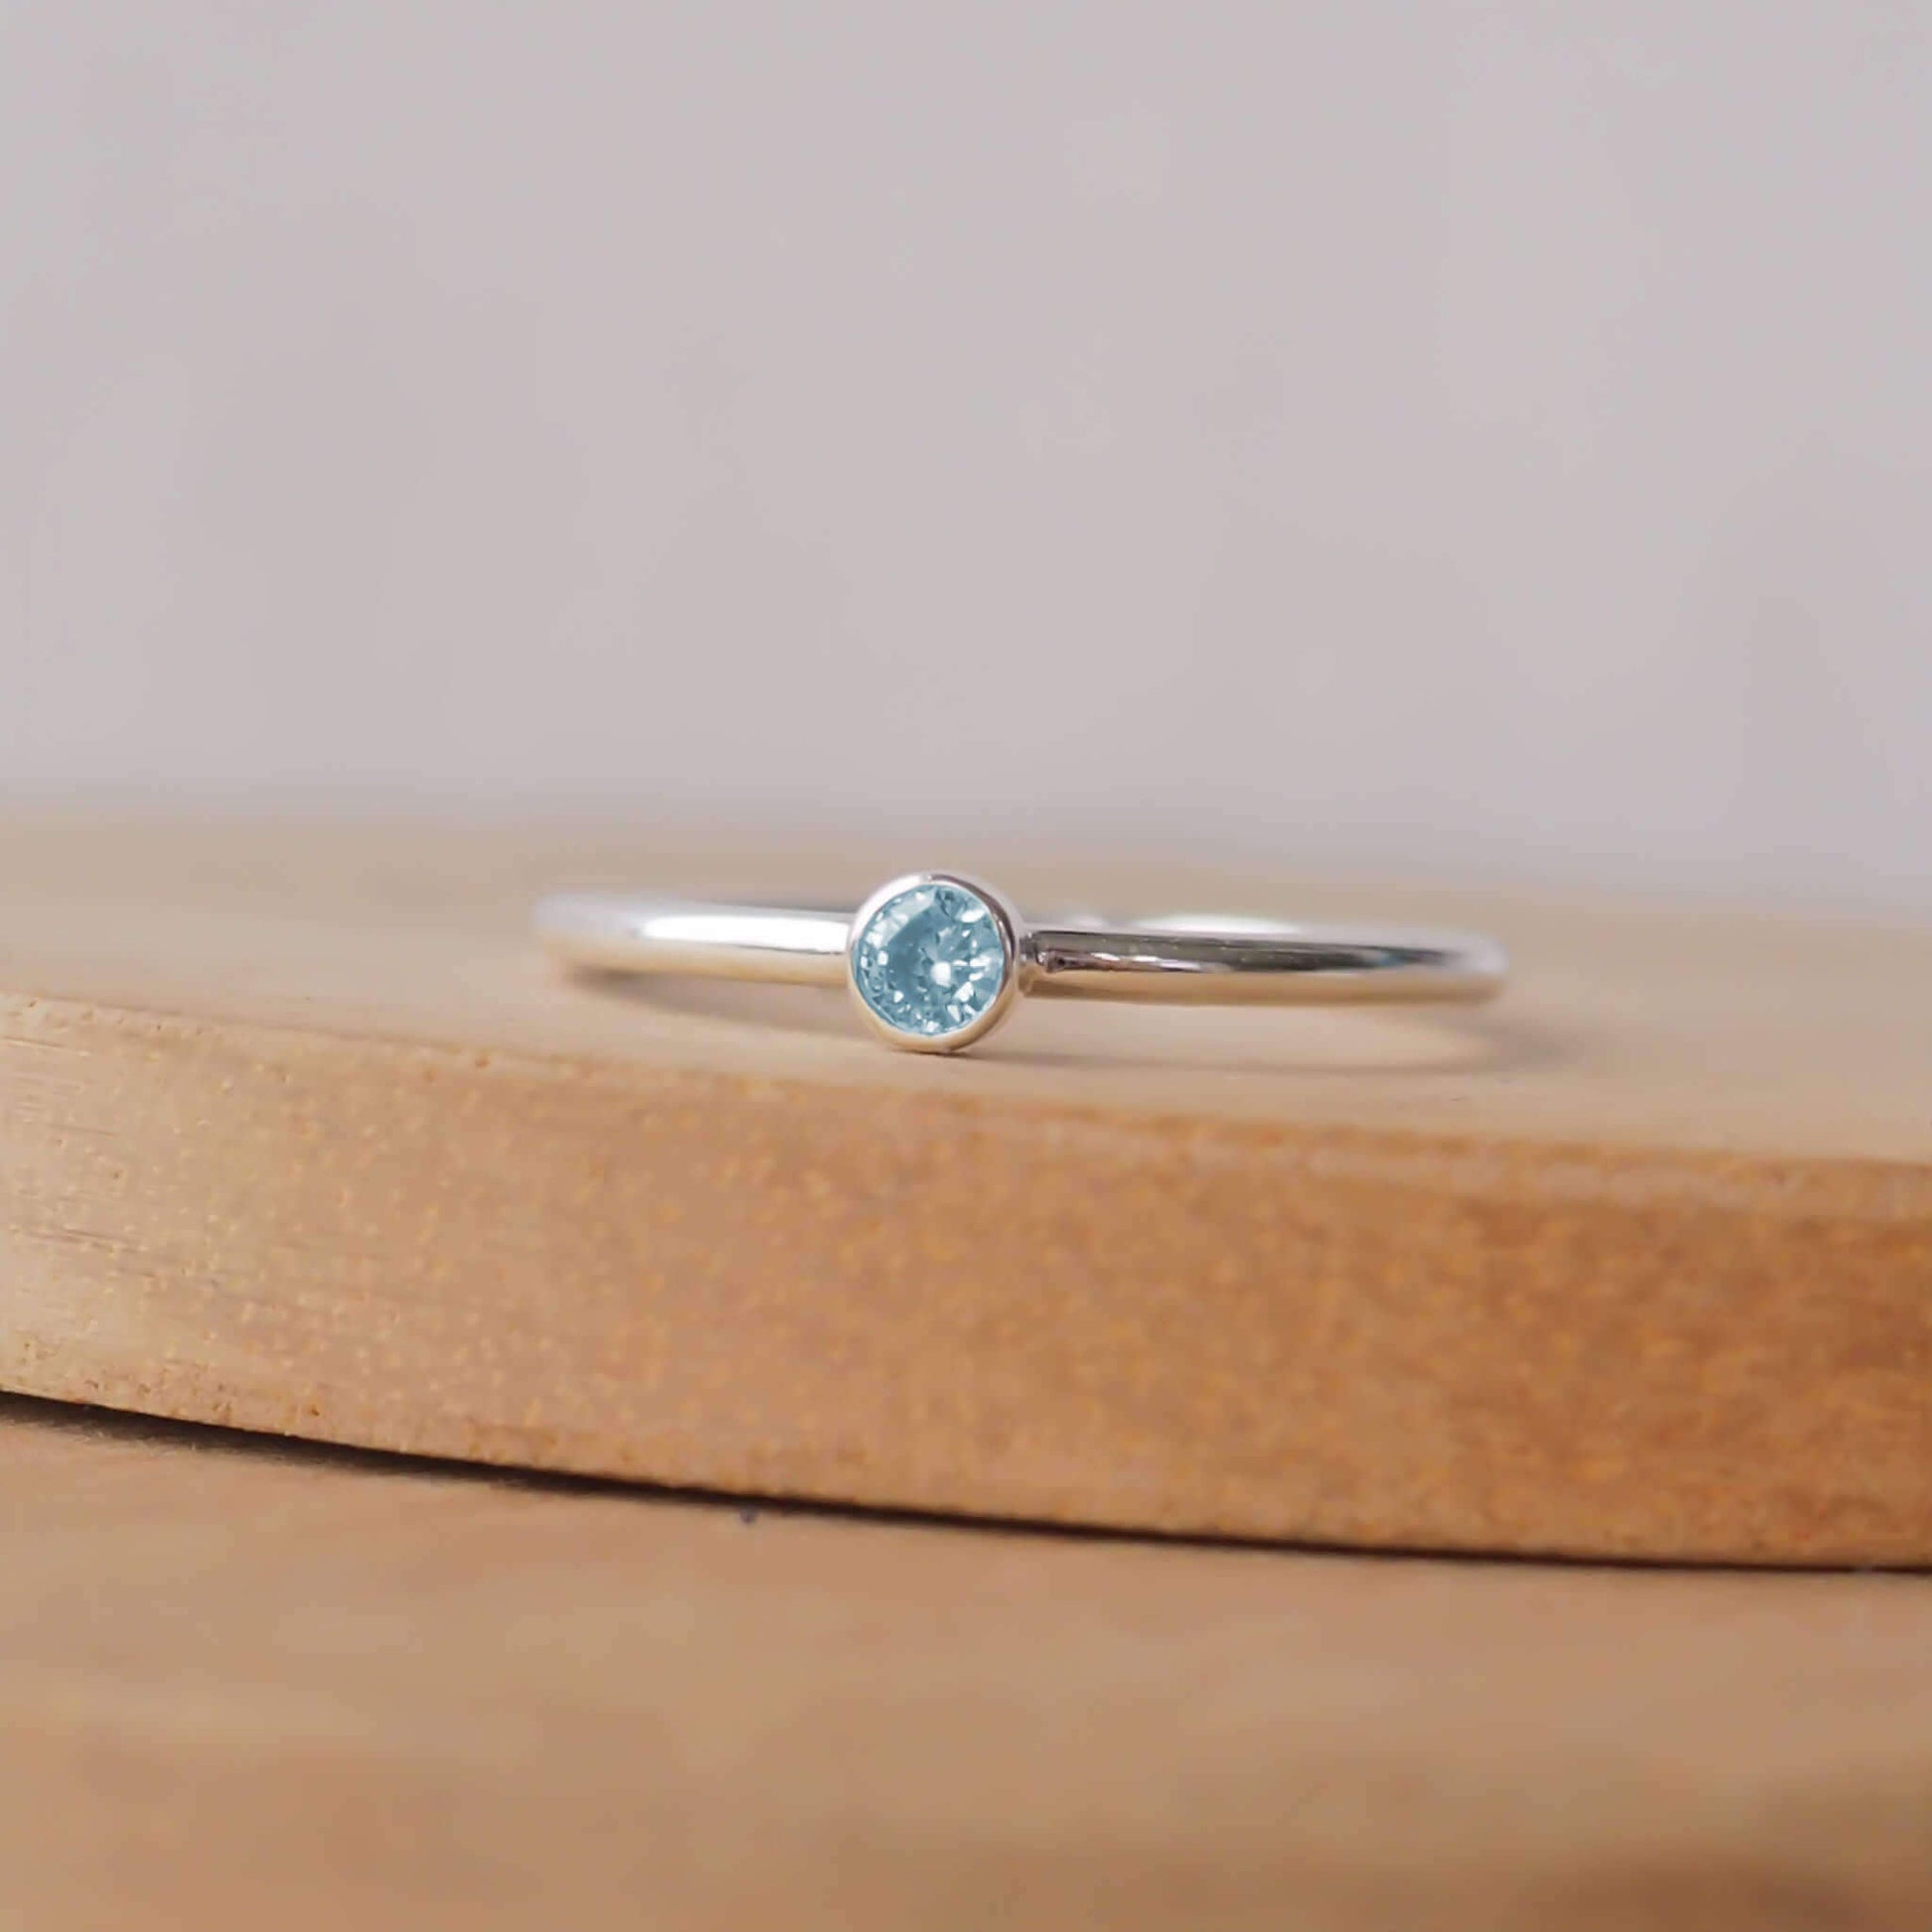 Aquamarine and Sterling Silver solitaire ring with an aqua coloured round cubic zirconia measuring 3mm in size. A very simple minimalist ring made from Sterling Silver on a halo style band. Handmade in Scotland by maram jewellery